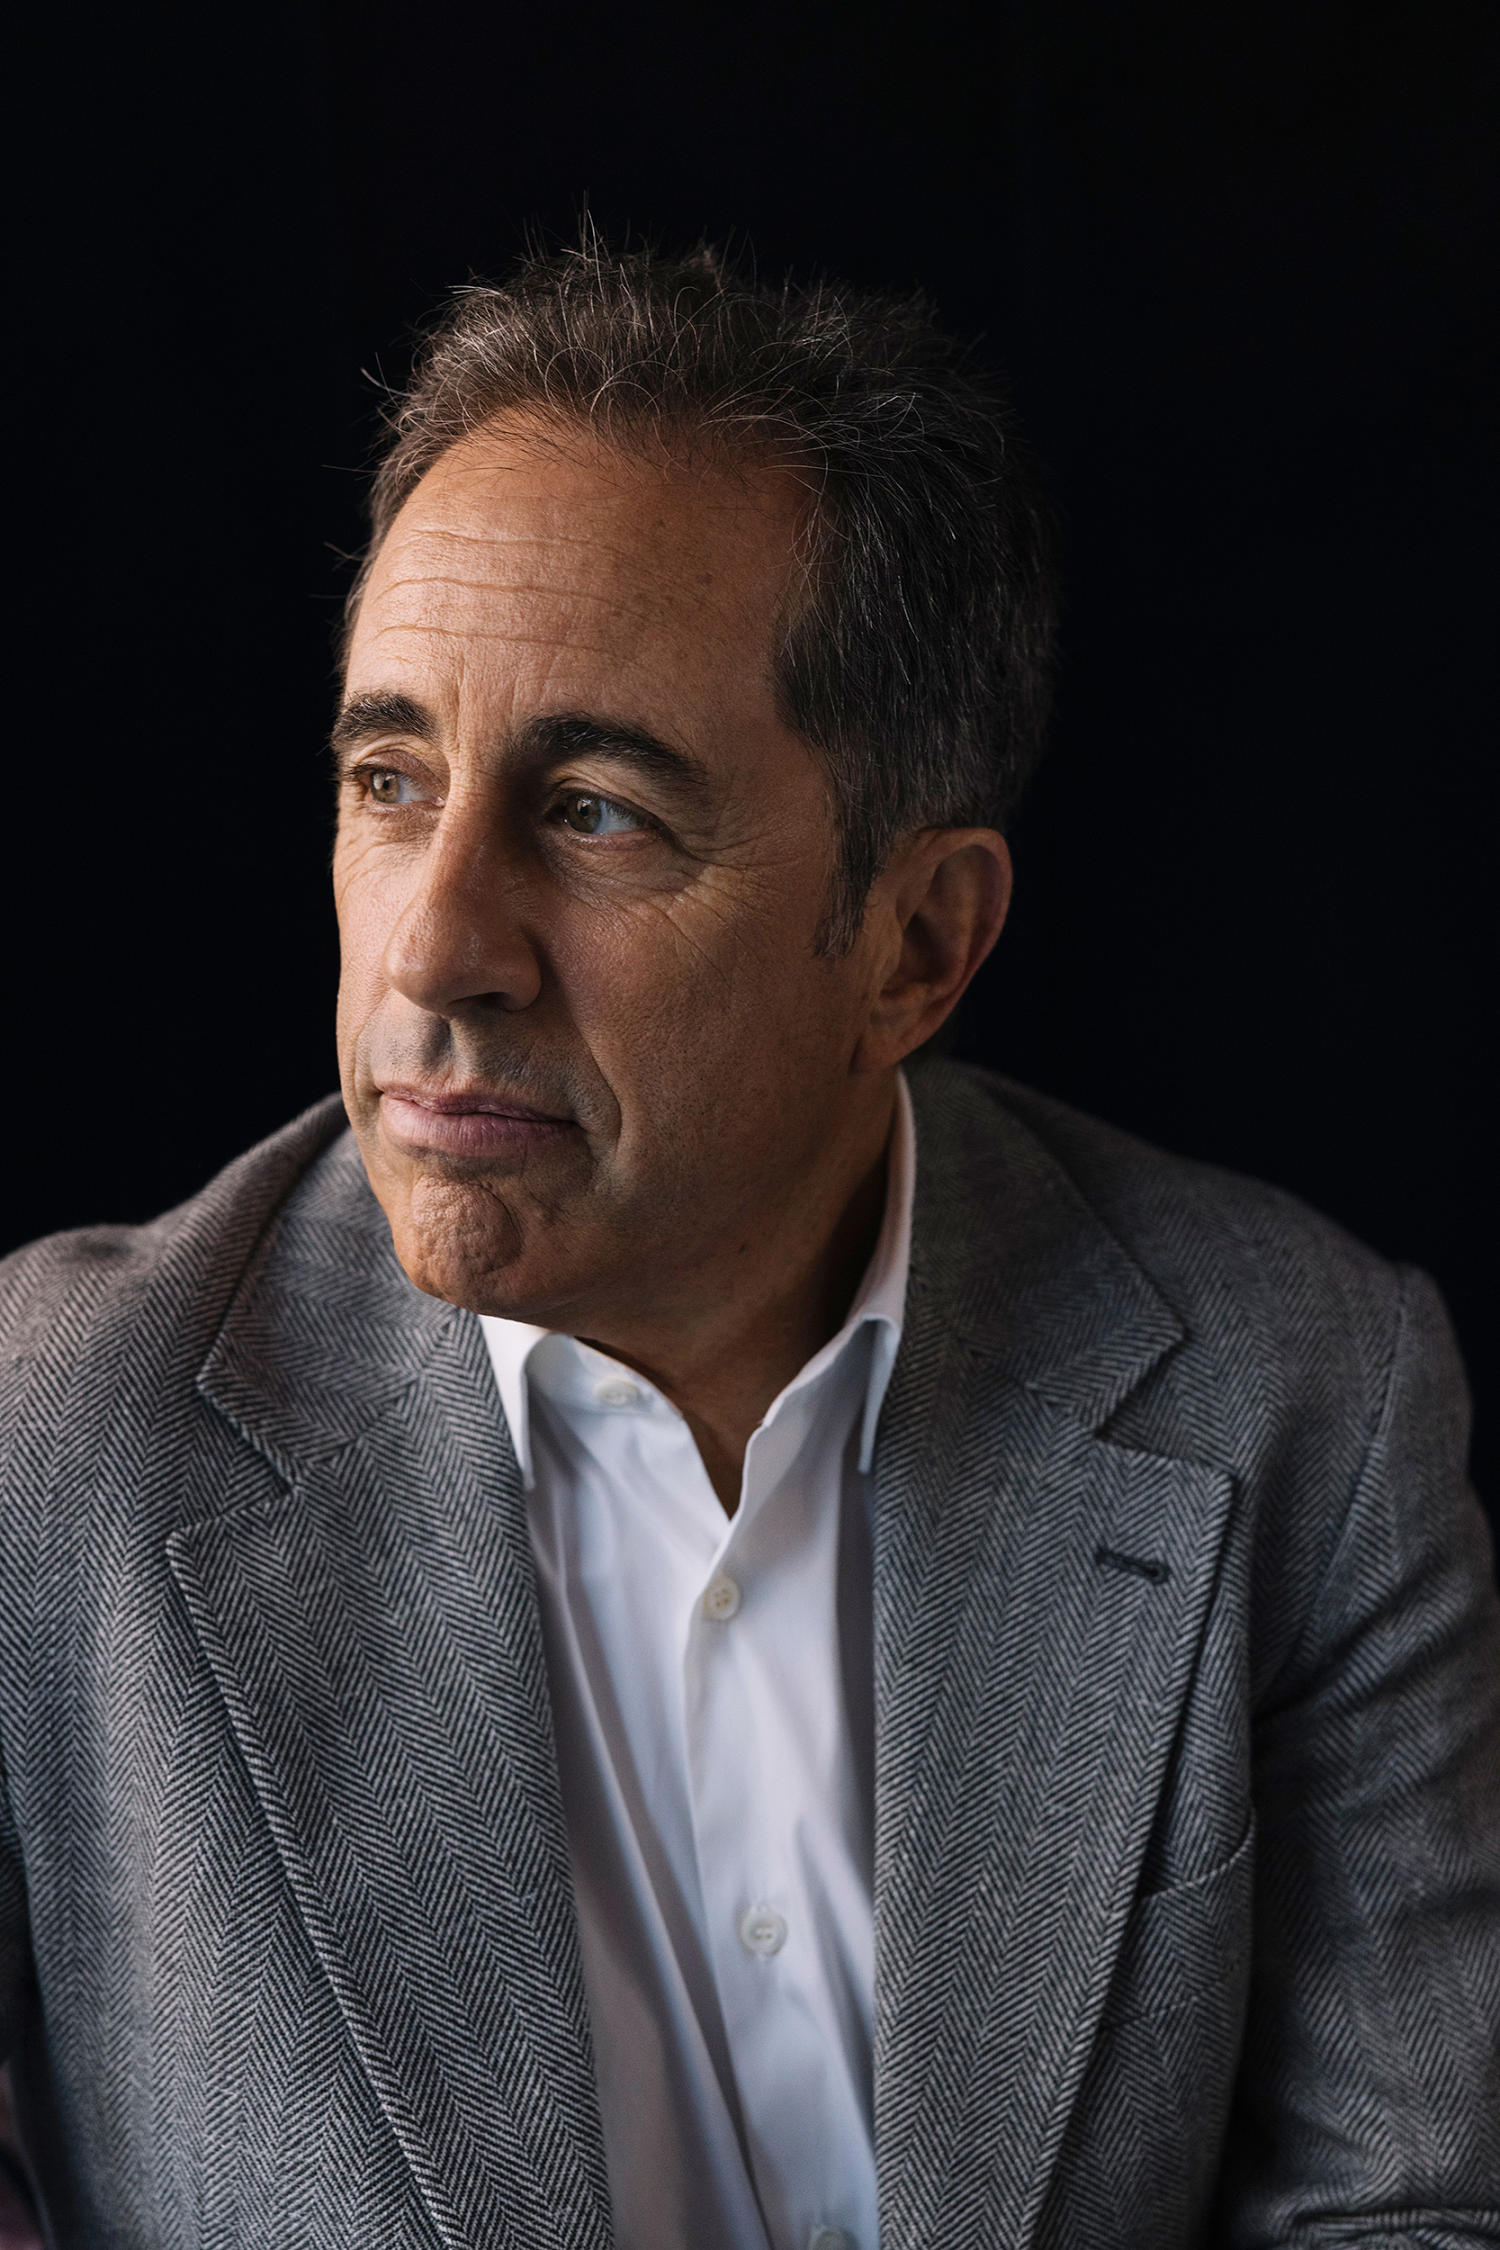 conservative pundits embrace jerry seinfeld’s comments about the ‘extreme left’ killing comedy